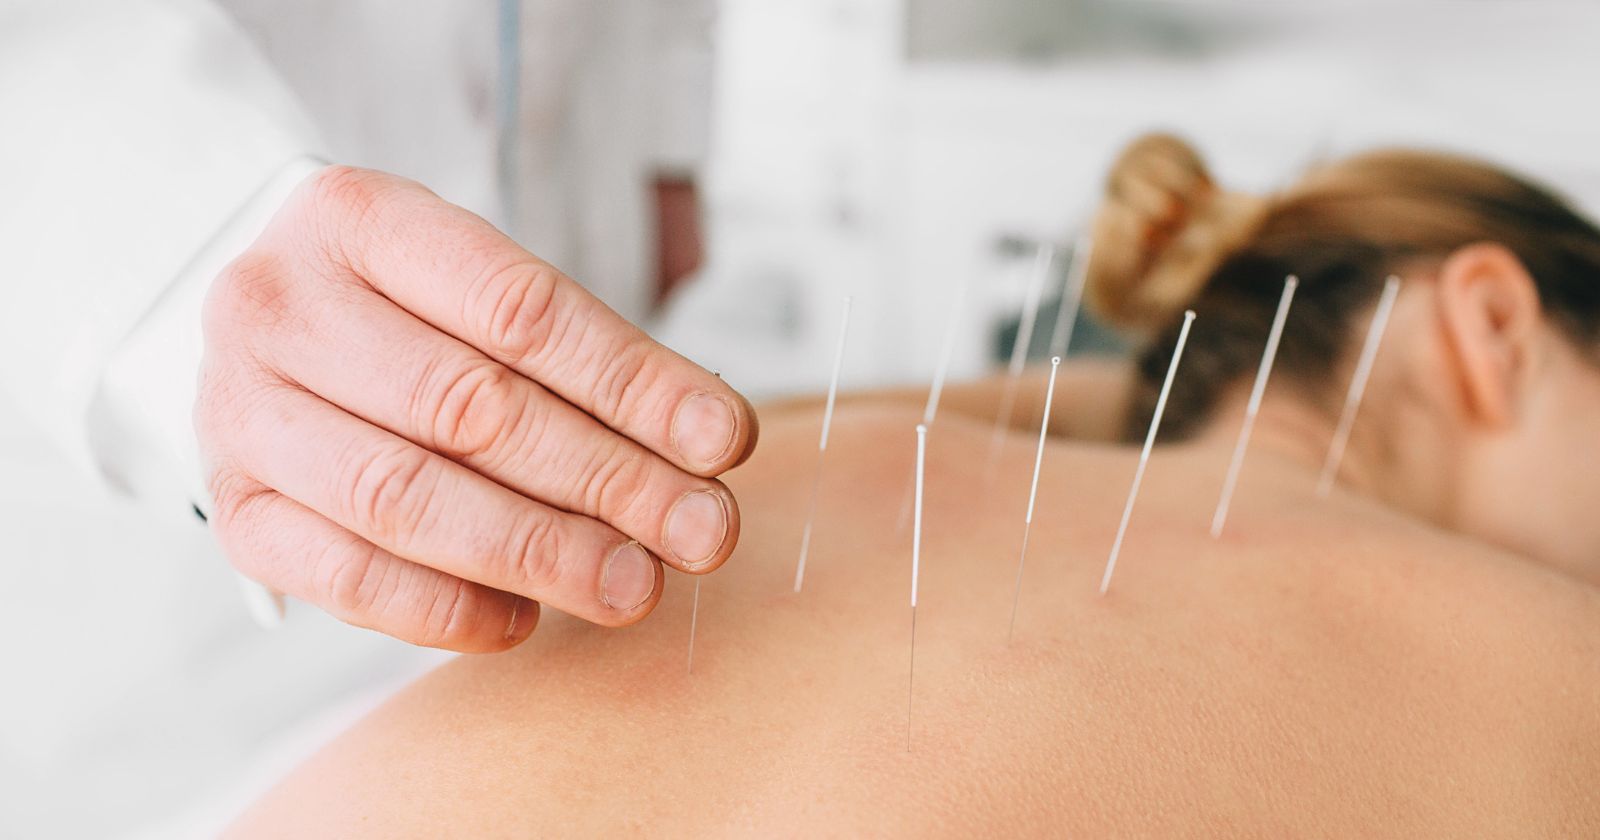 Does Medicare Cover Acupunctur